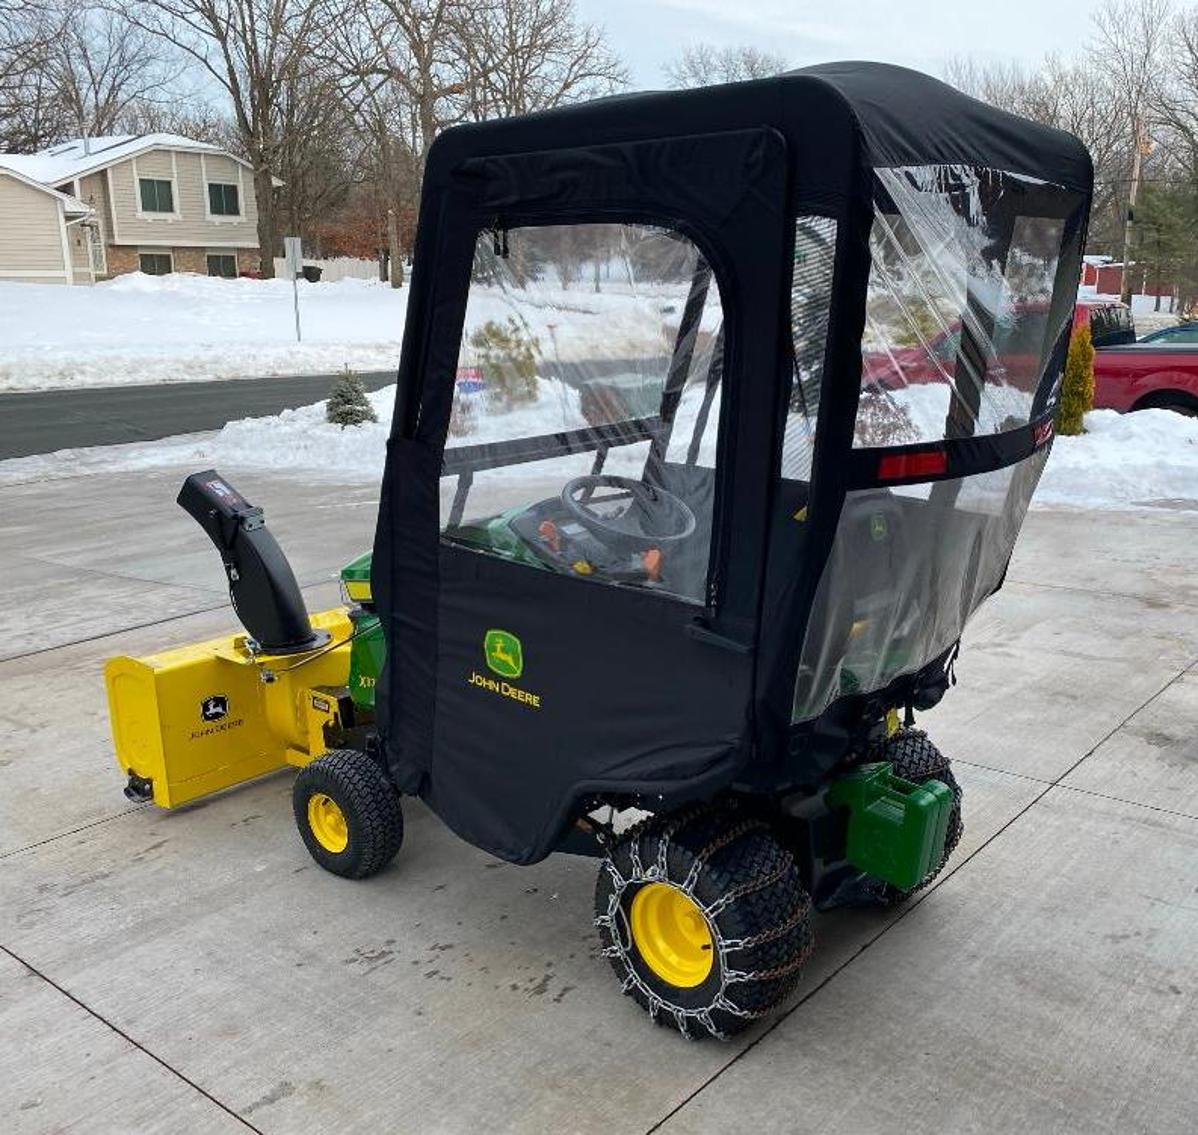 2019 John Deere X370 Garden Tractor With Cab, Snow Blower, And 42